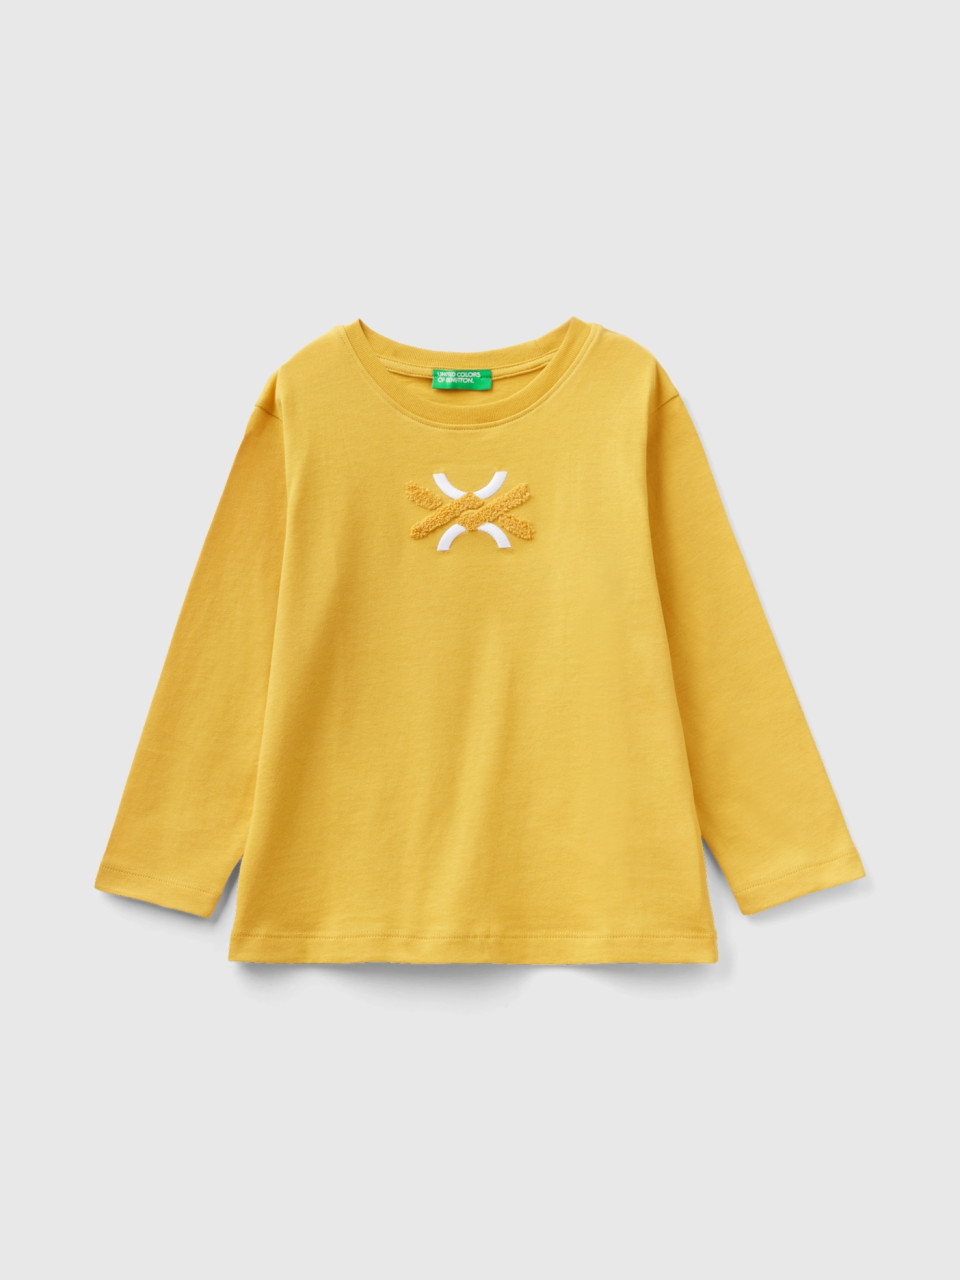 Benetton, T-shirt With Terry Embroidery, Yellow, Kids